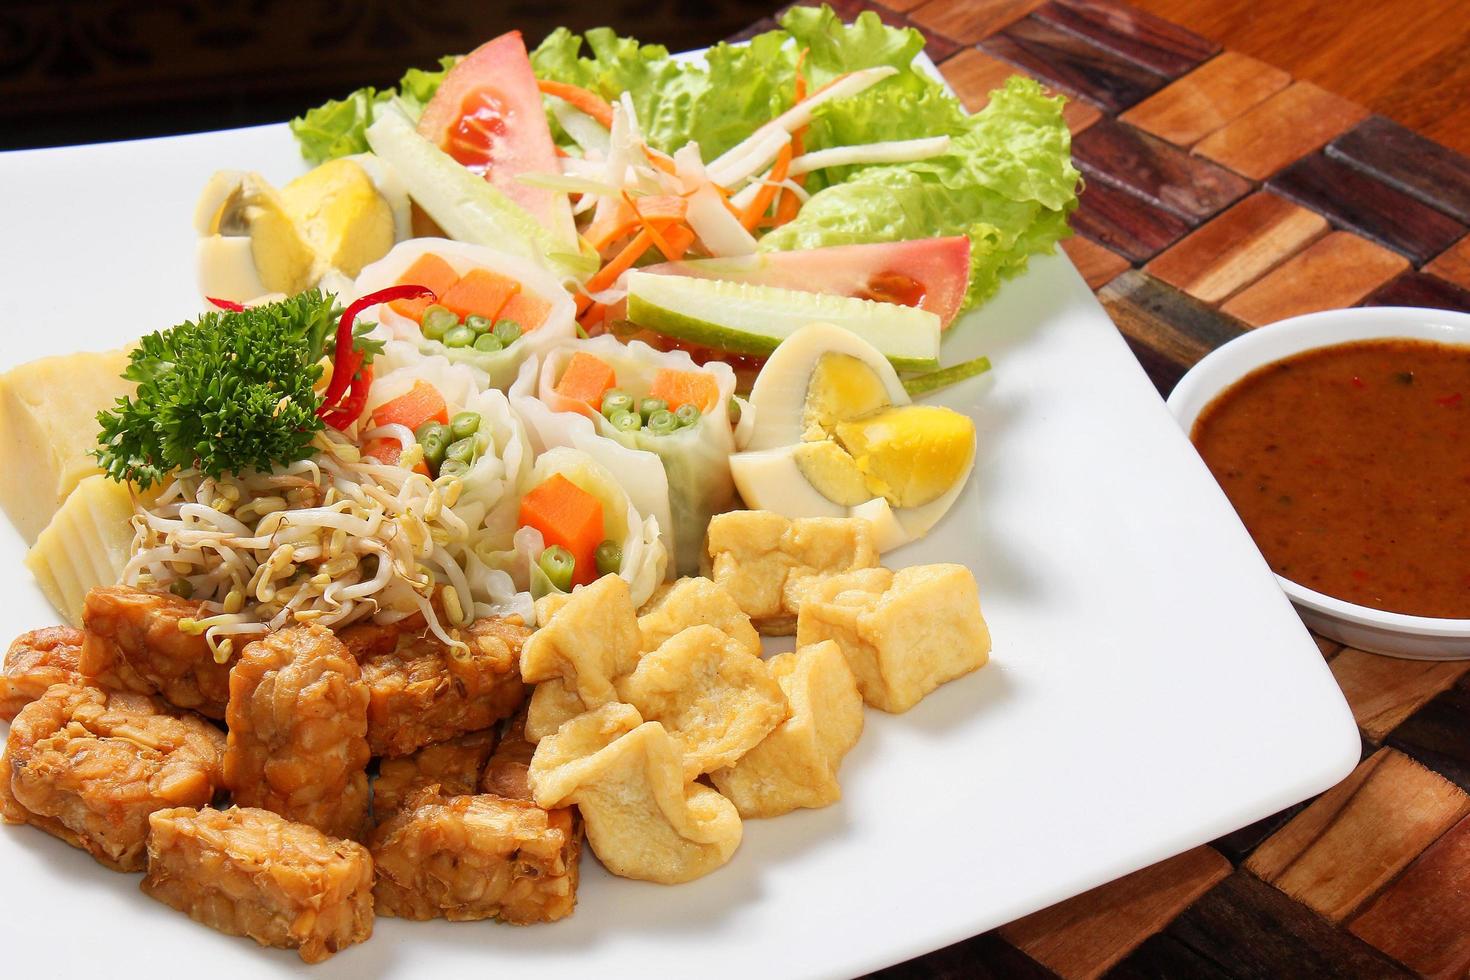 Gado-gado, is a traditional Indonesian dish. Consists of a mixture of pieces of bean sprouts, carrots, beans, which have been boiled. Add tempeh and fried tofu squares. There are boiled chicken eggs. photo